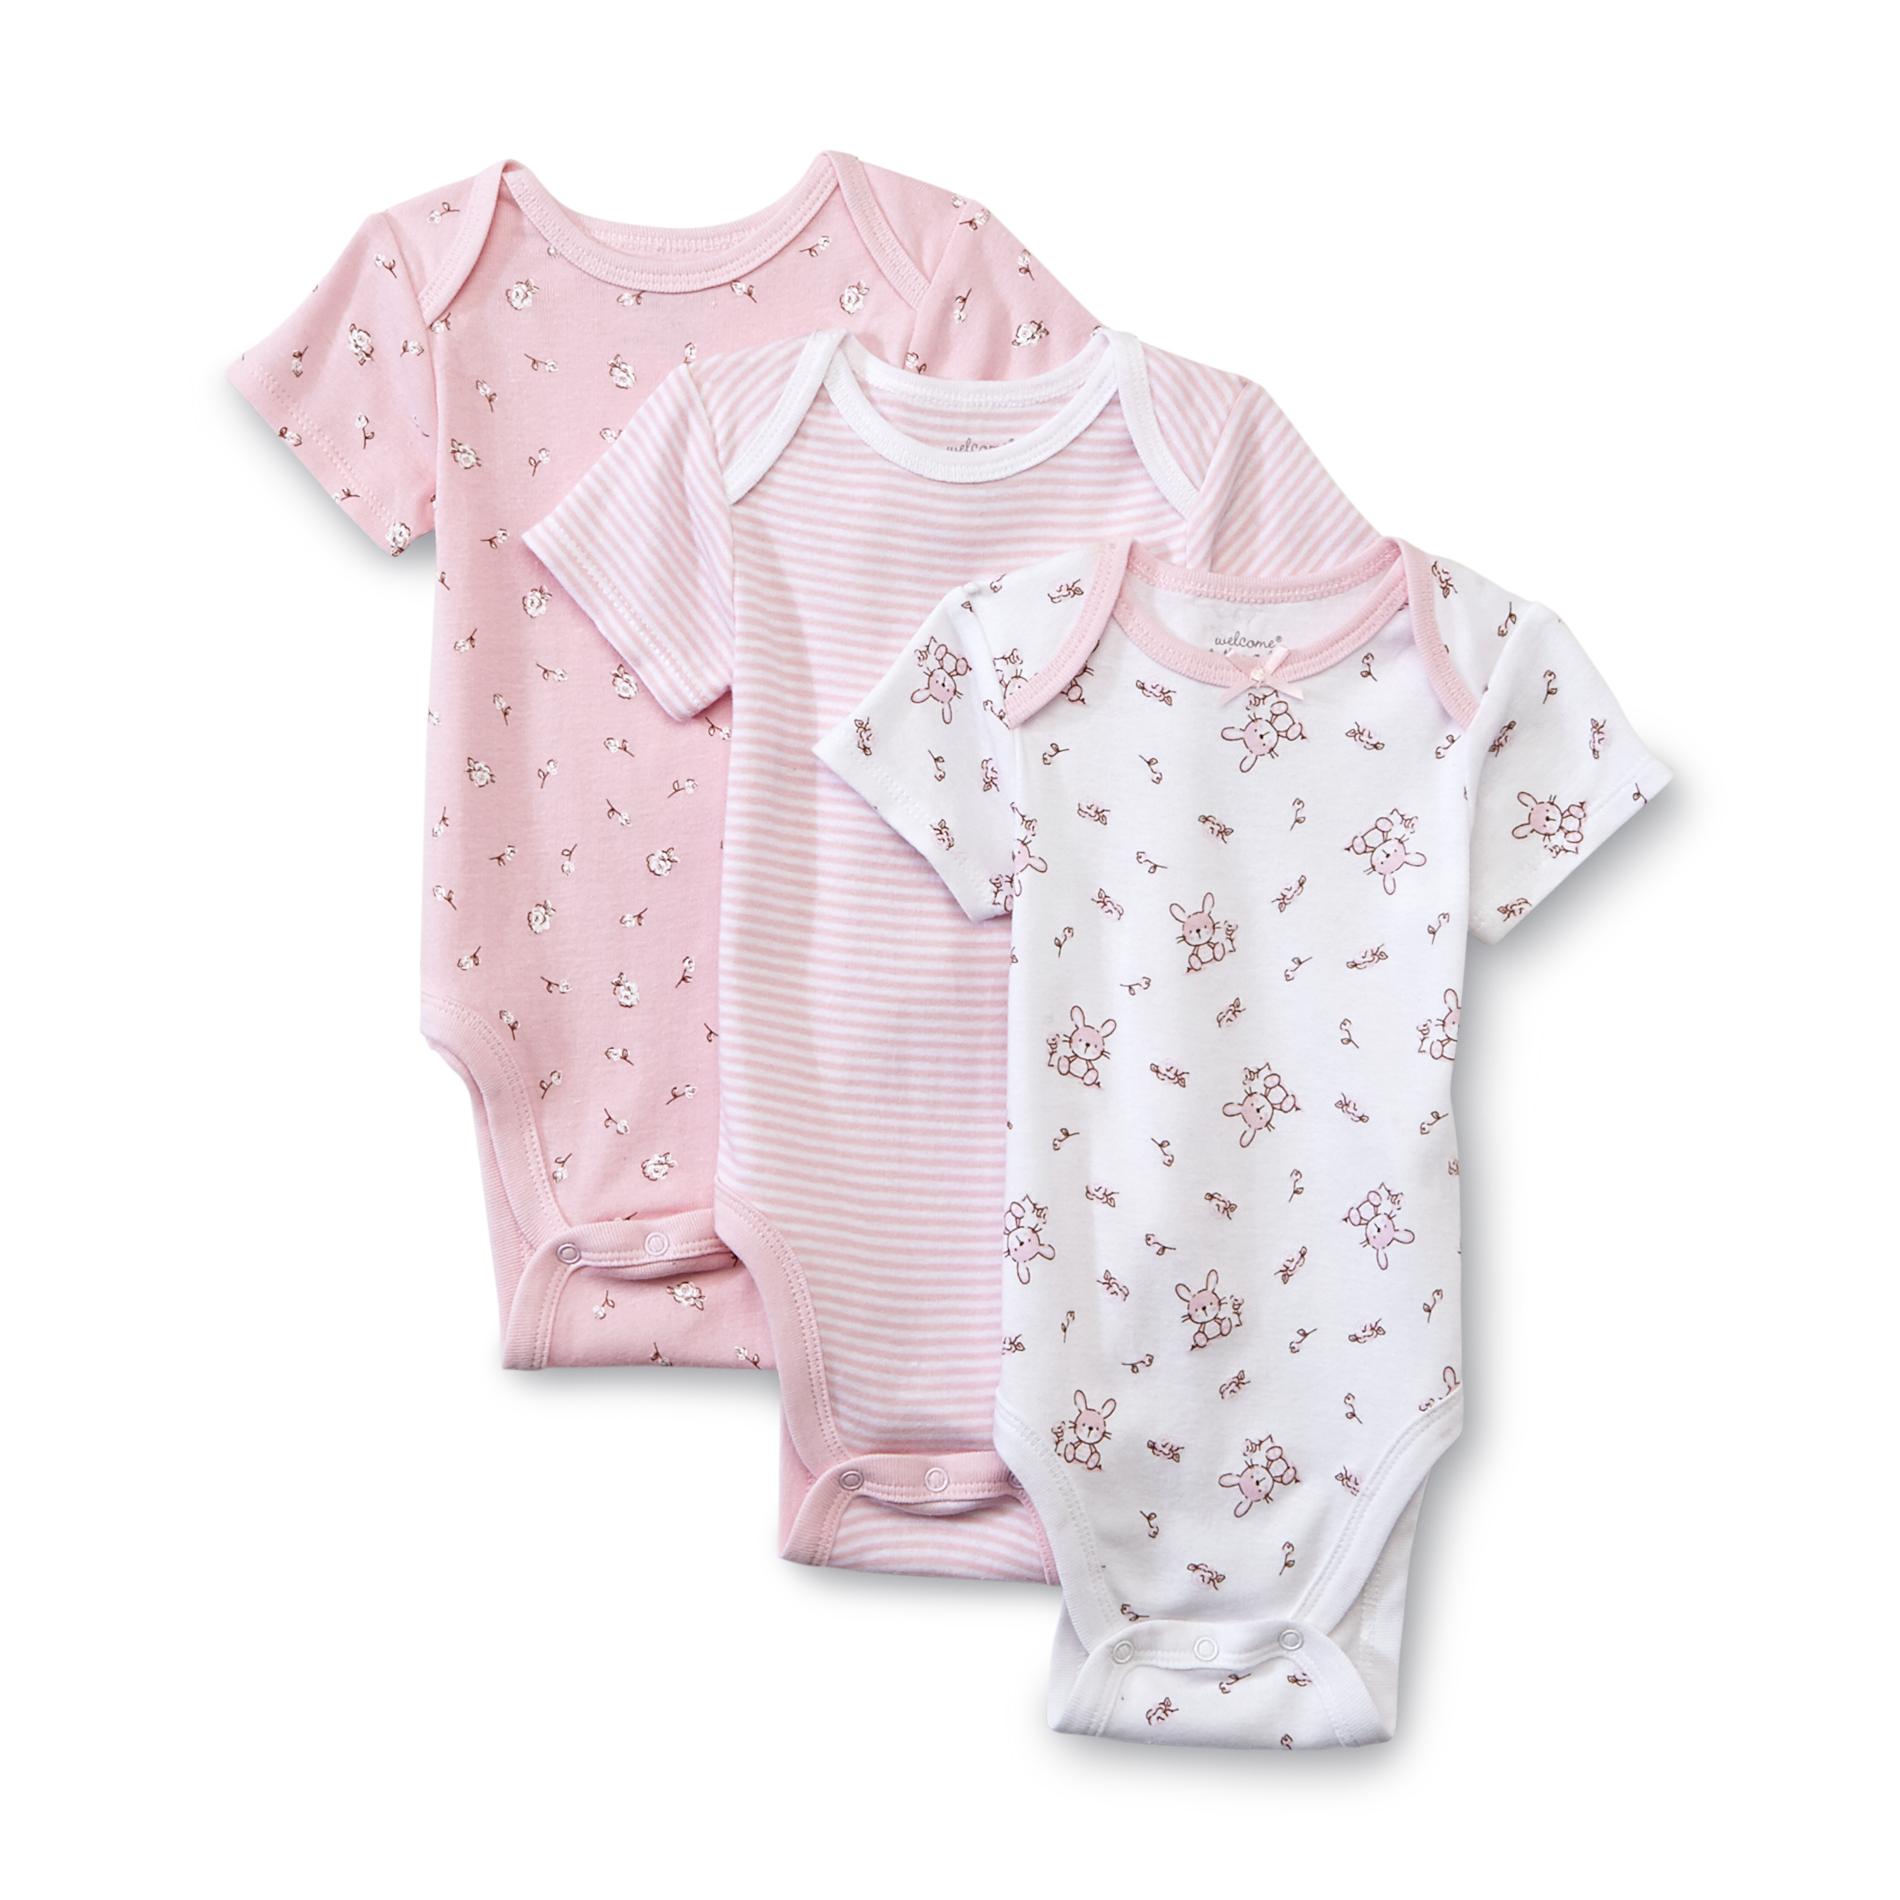 Welcome to the World Newborn Girl's 3-Pack Bodysuits - Bunnies